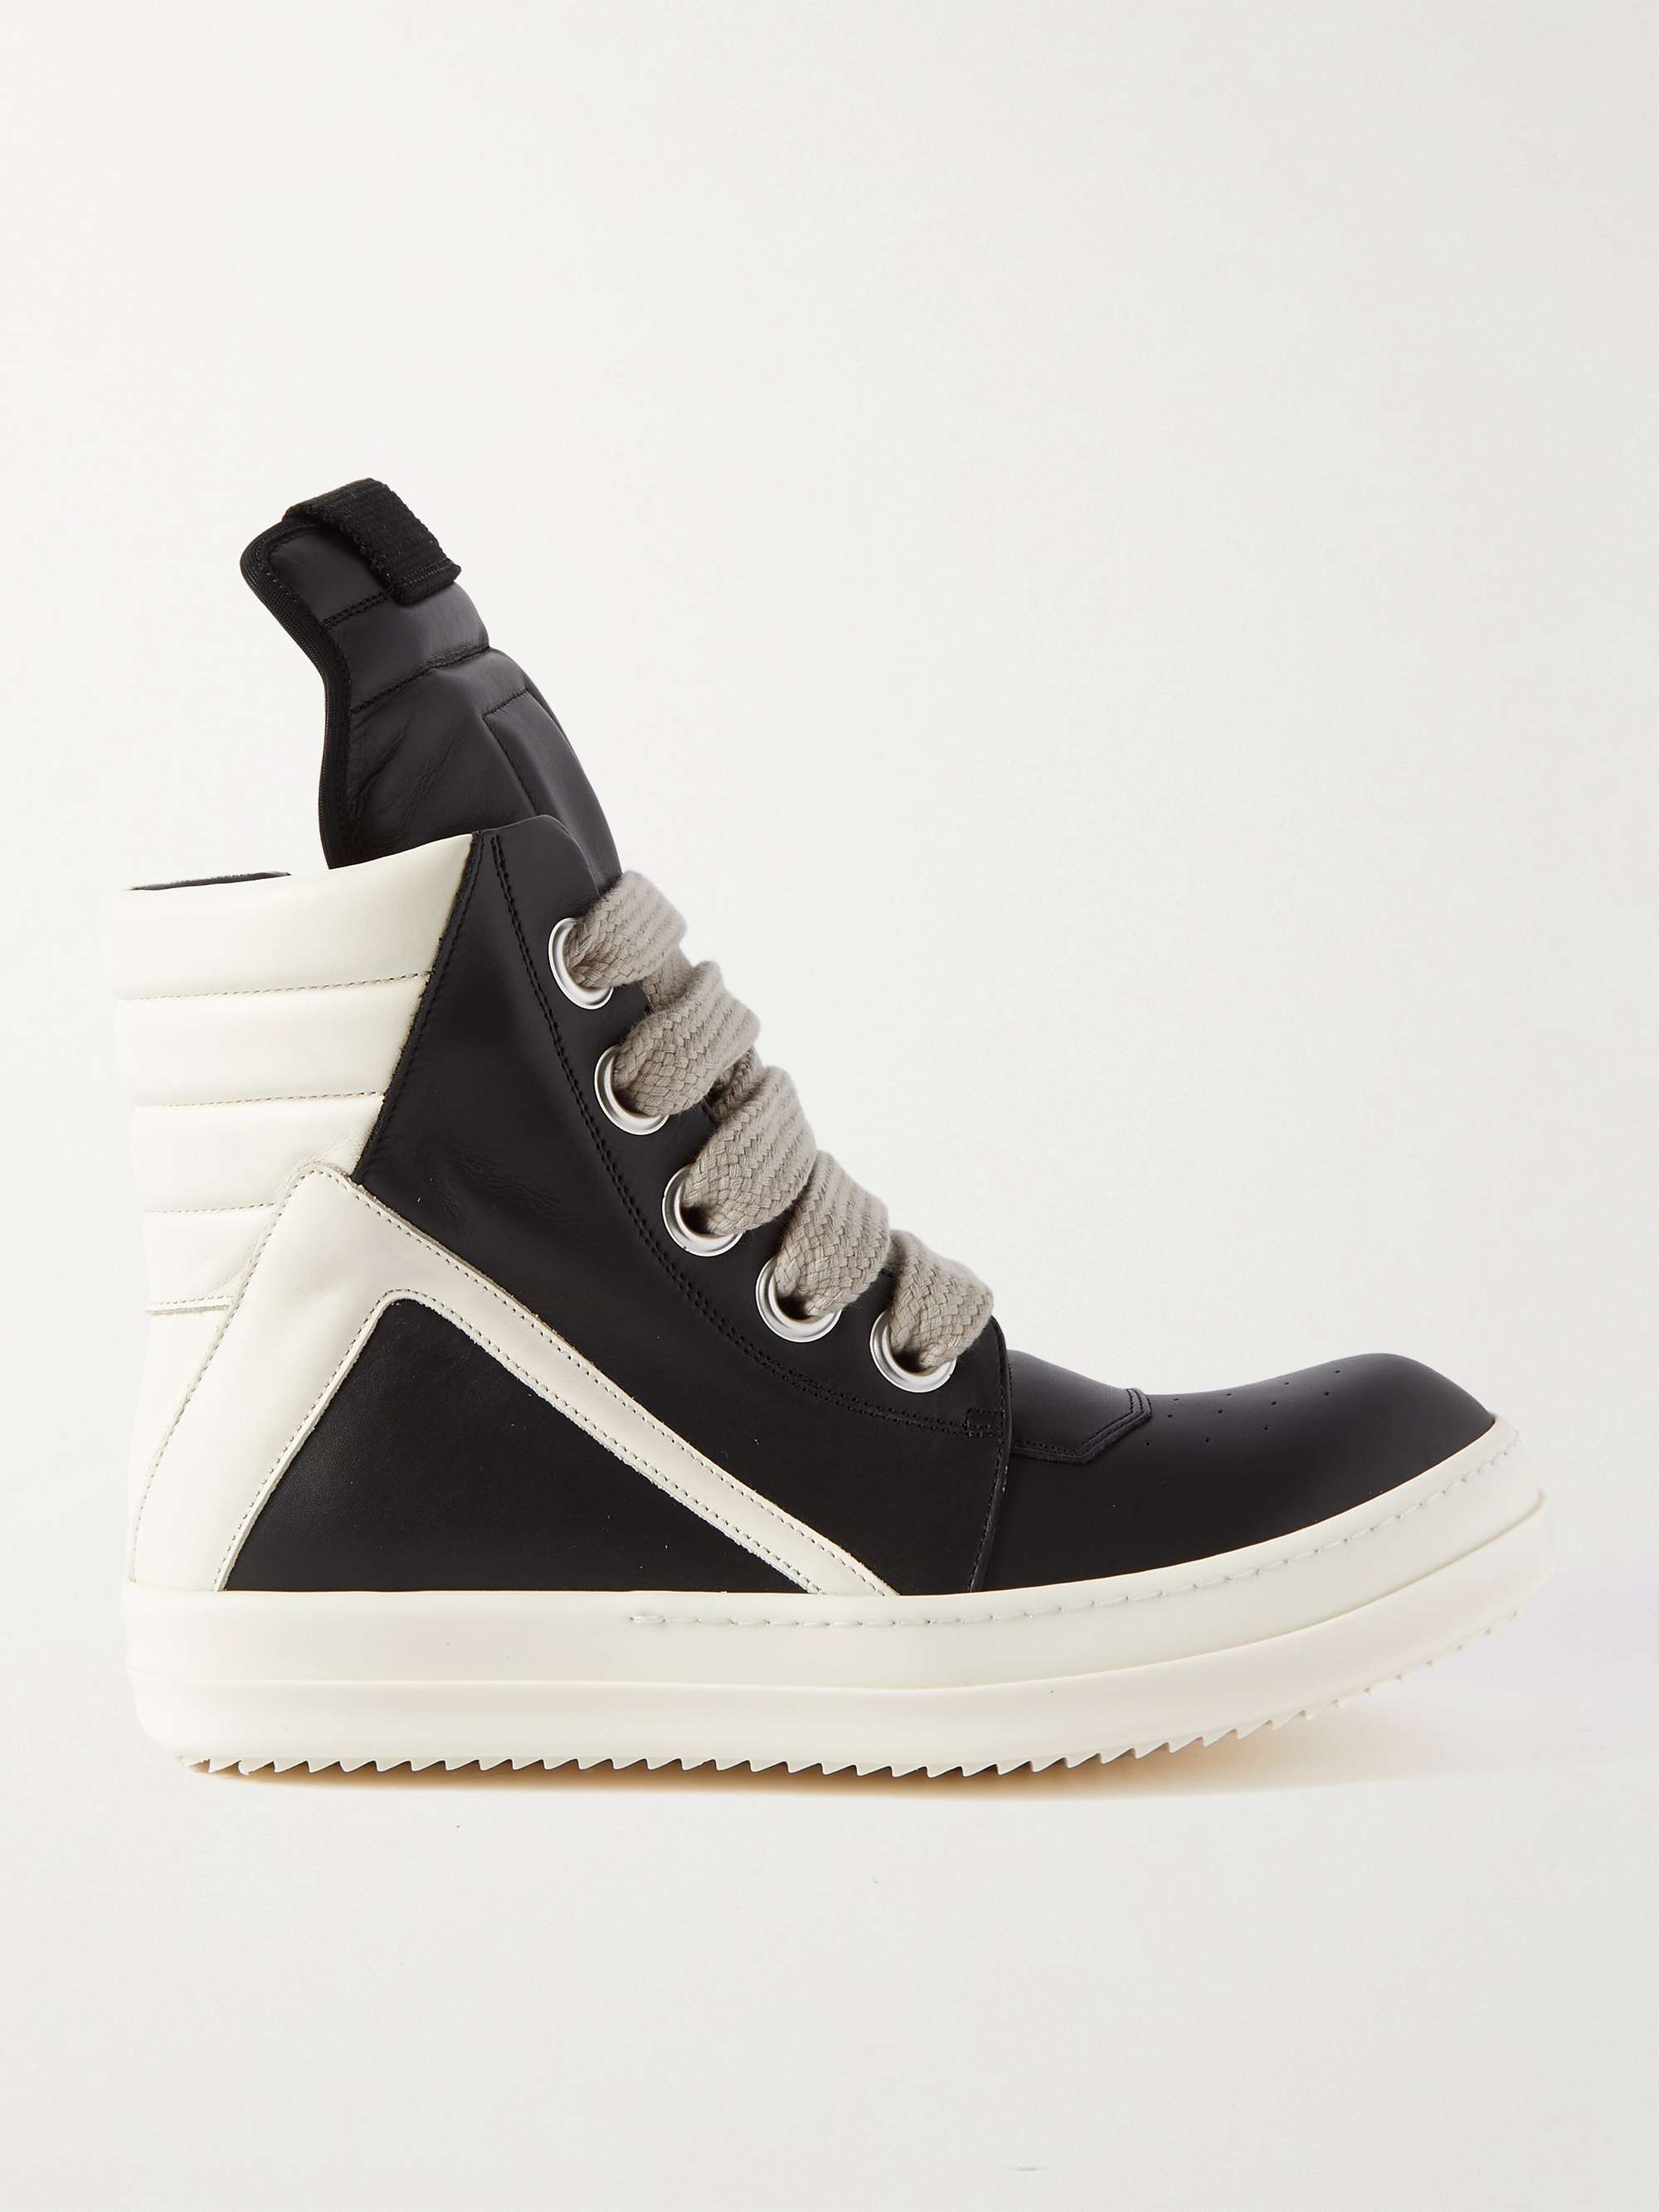 RICK OWENS Geobasket Two-Tone Leather High-Top Sneakers | MR PORTER